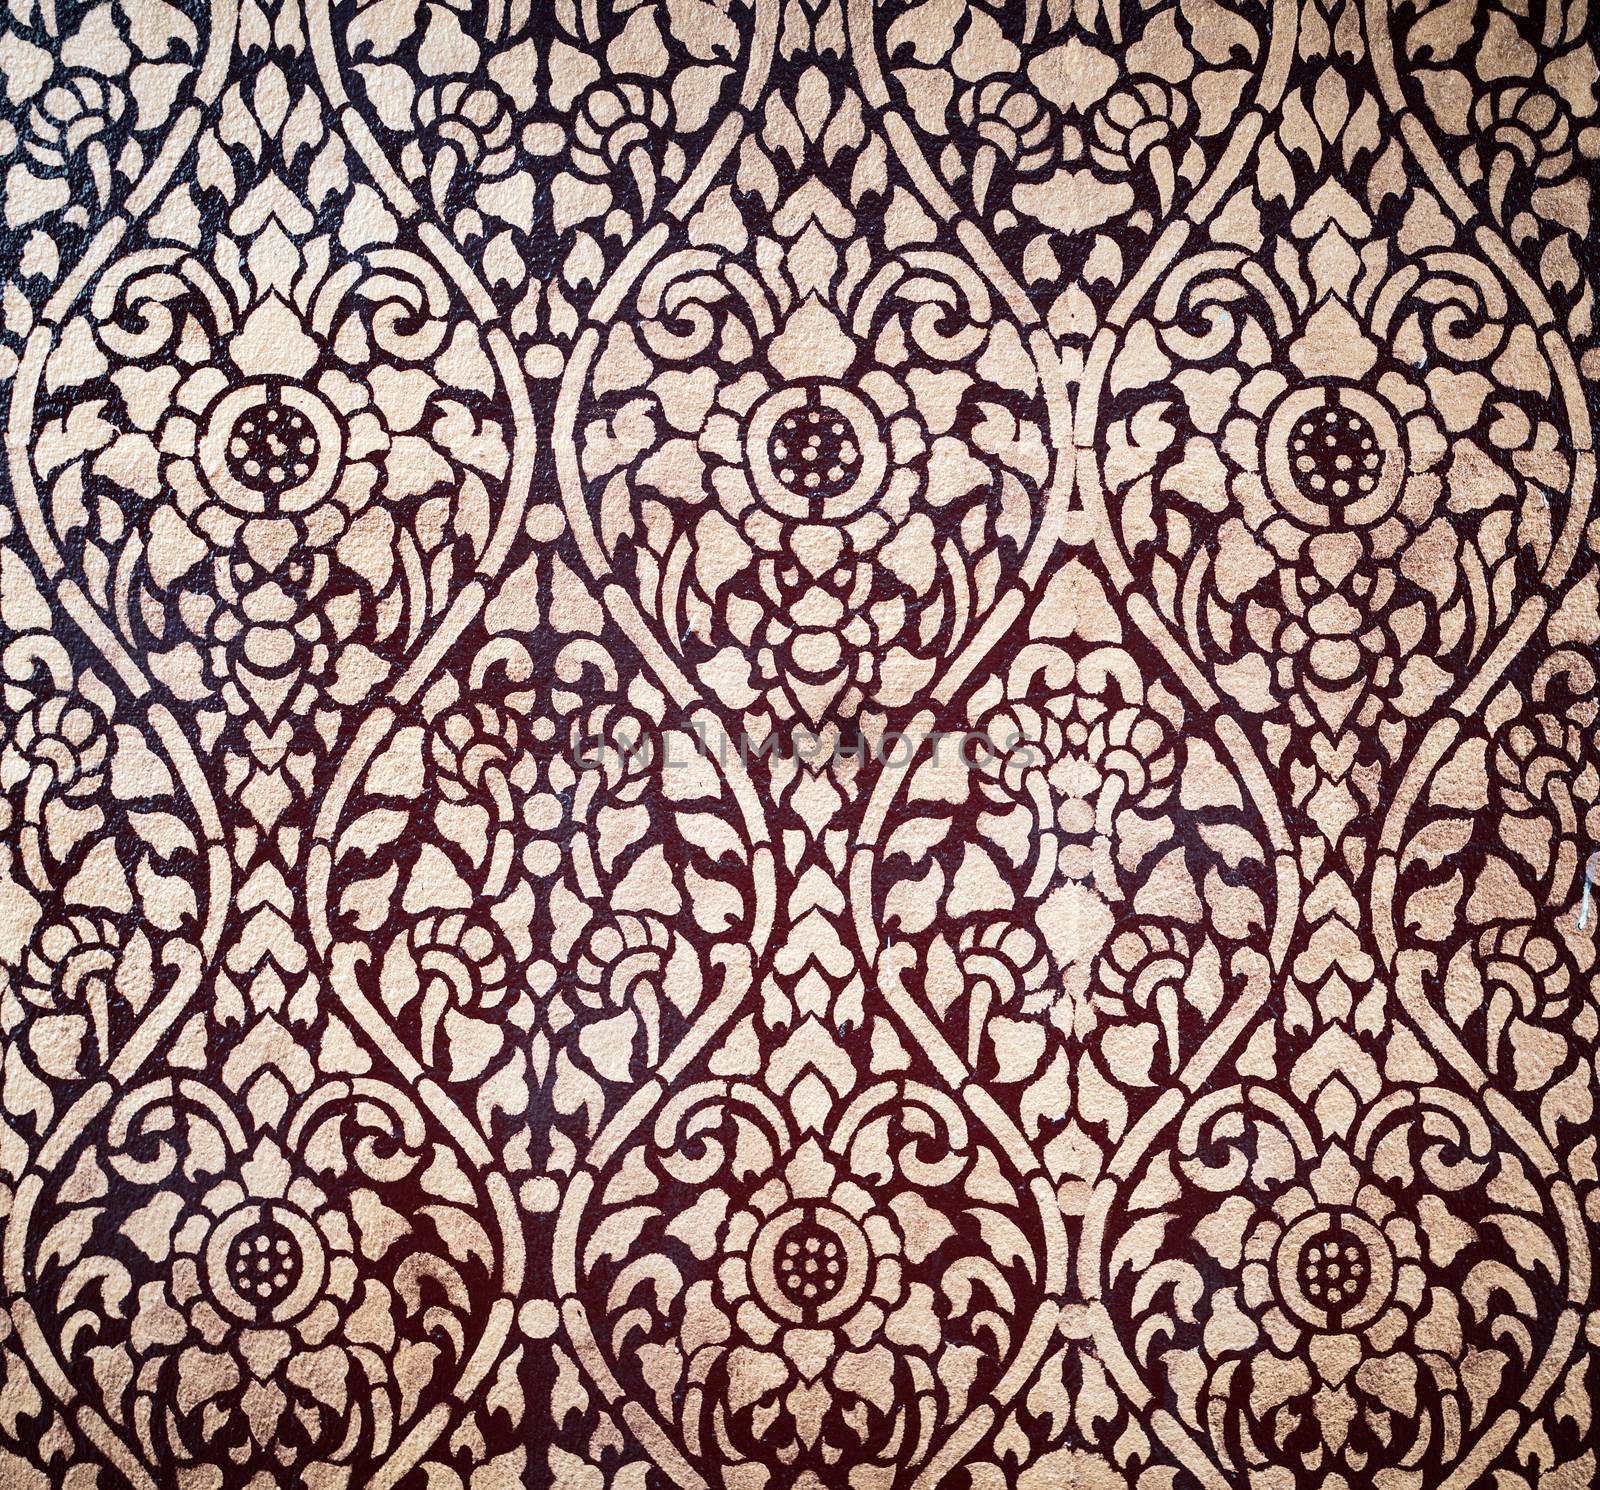 Thai pattern background by pkproject